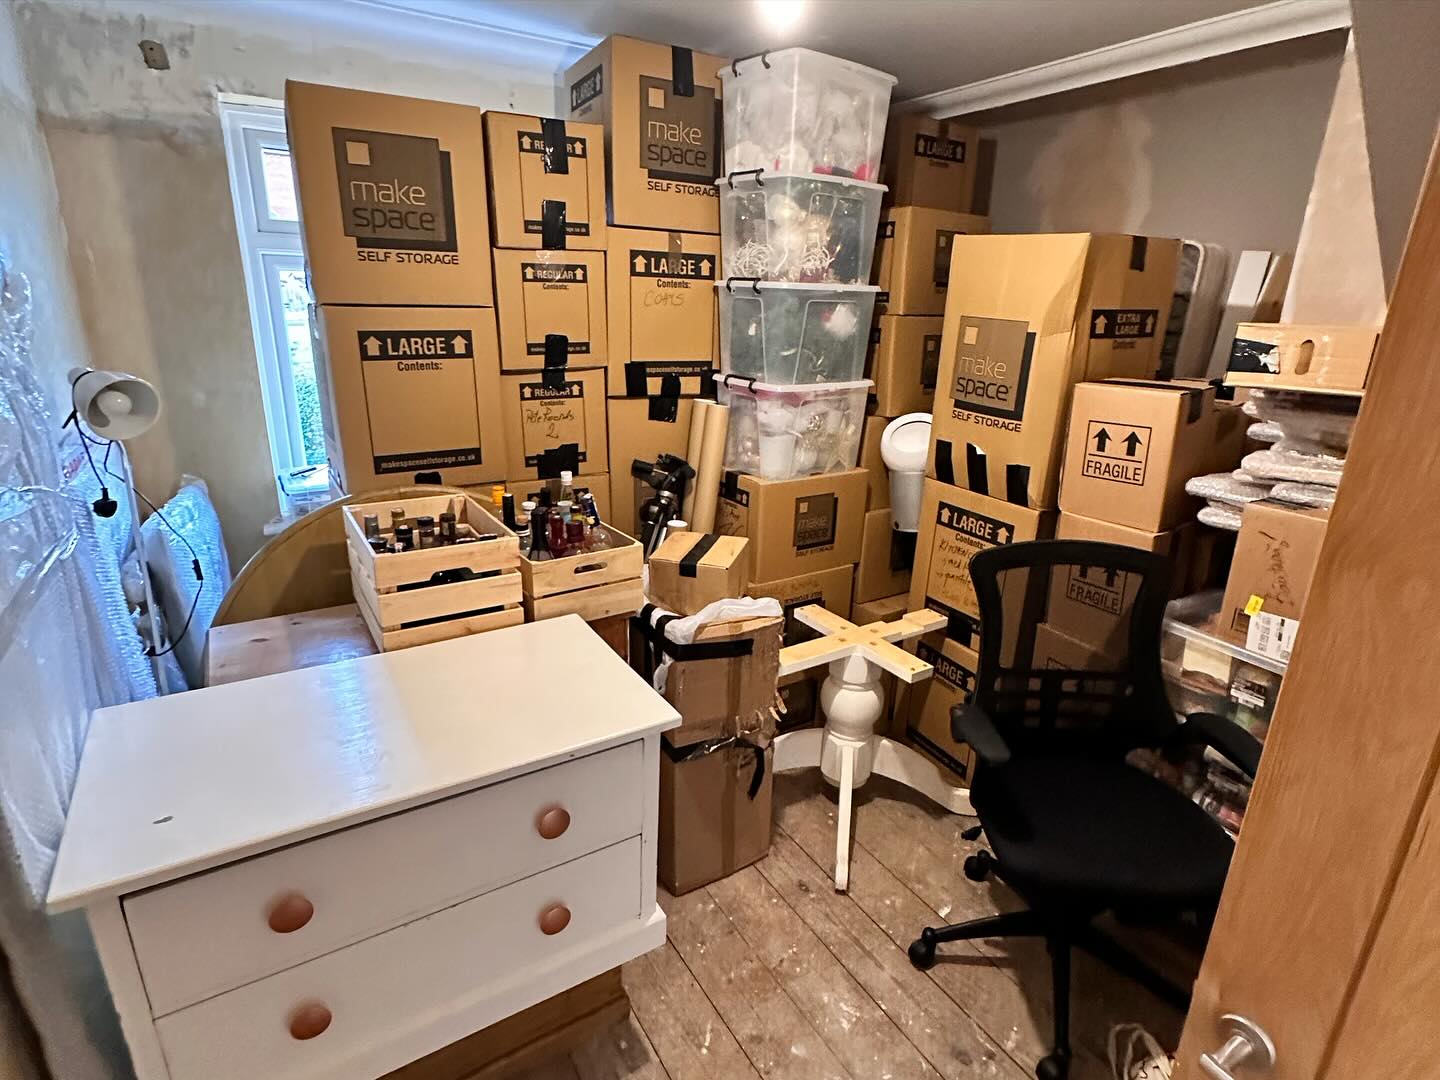 Boxes packed up in home bedroom